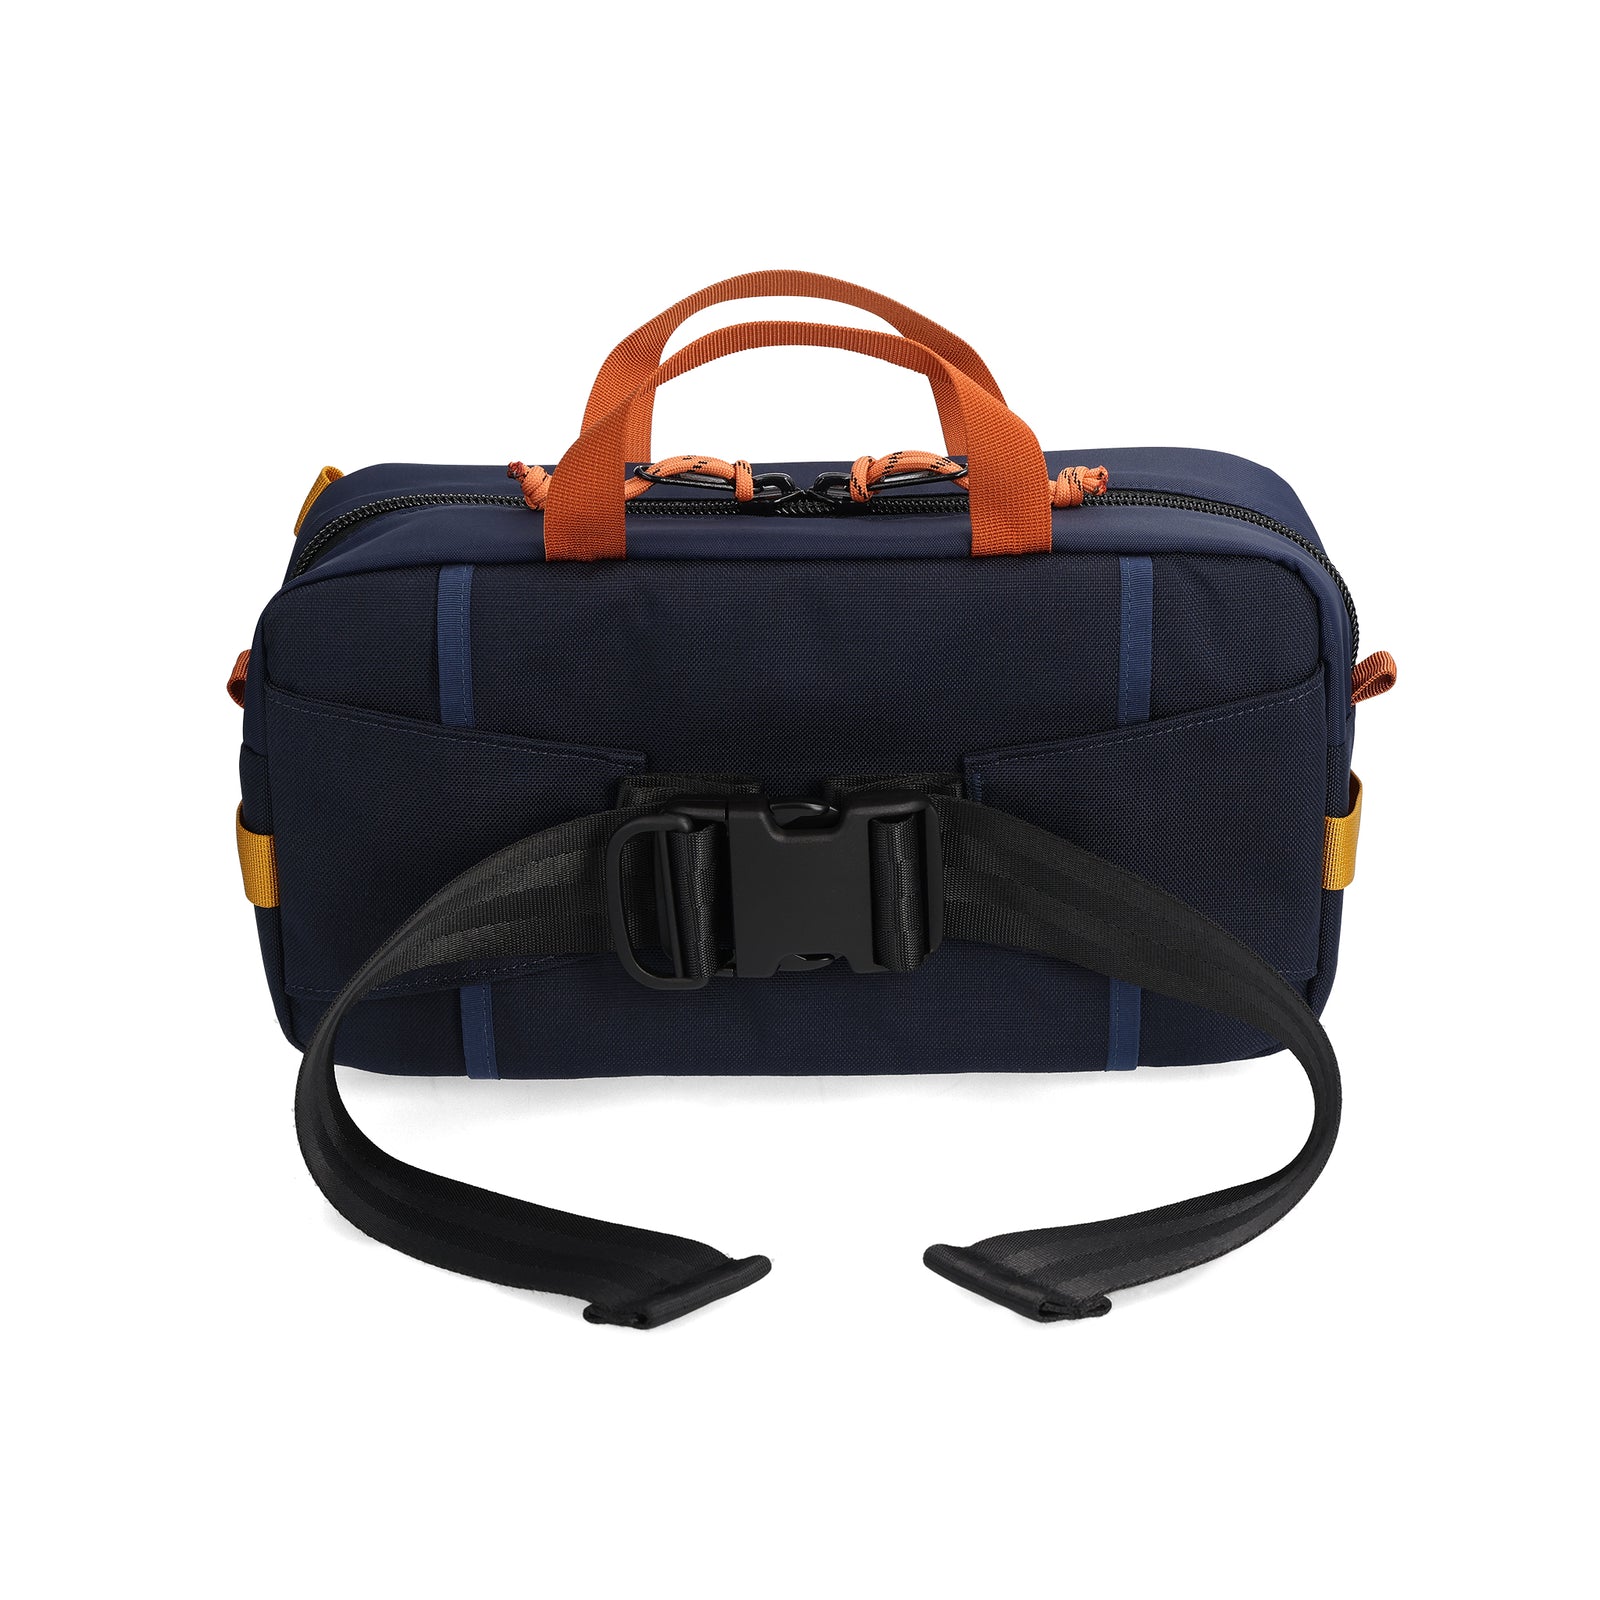 Back View of Topo Designs Quick Pack  in "Navy / Multi"